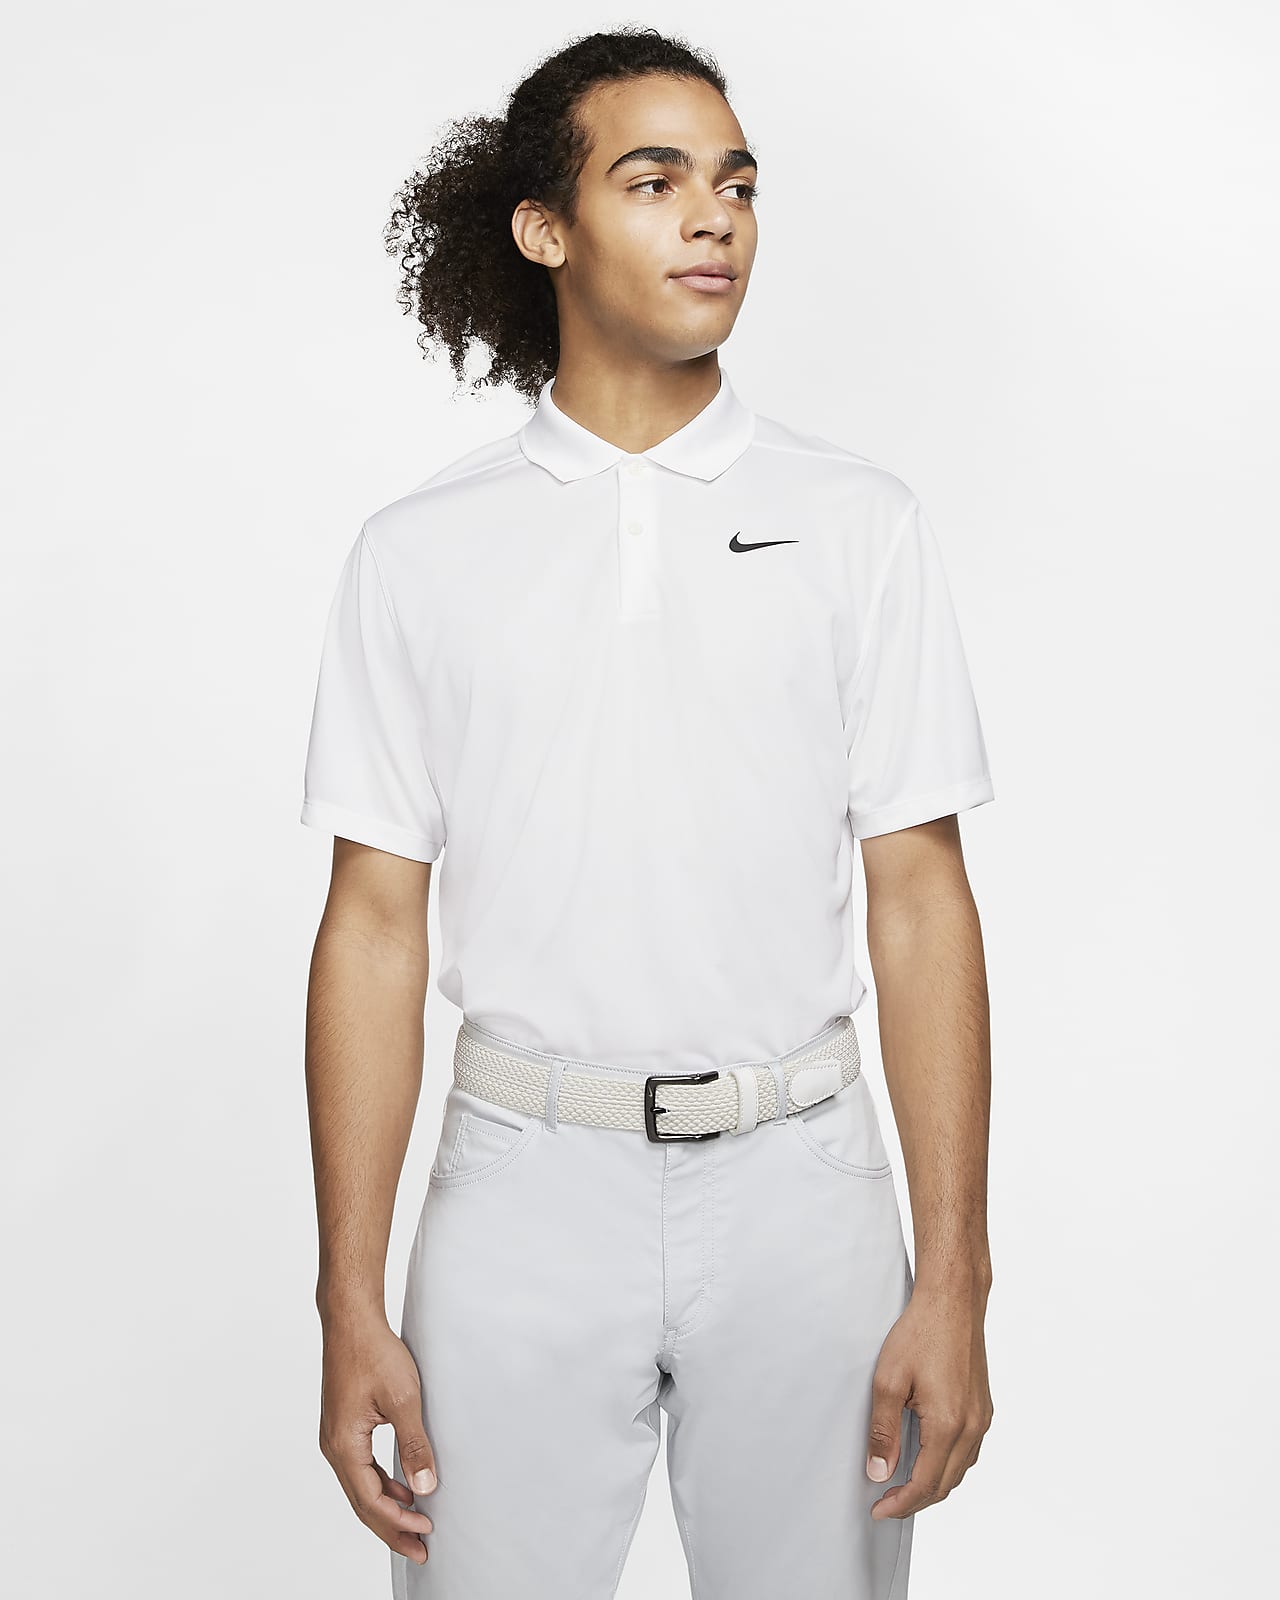 white and black nike jogging suit